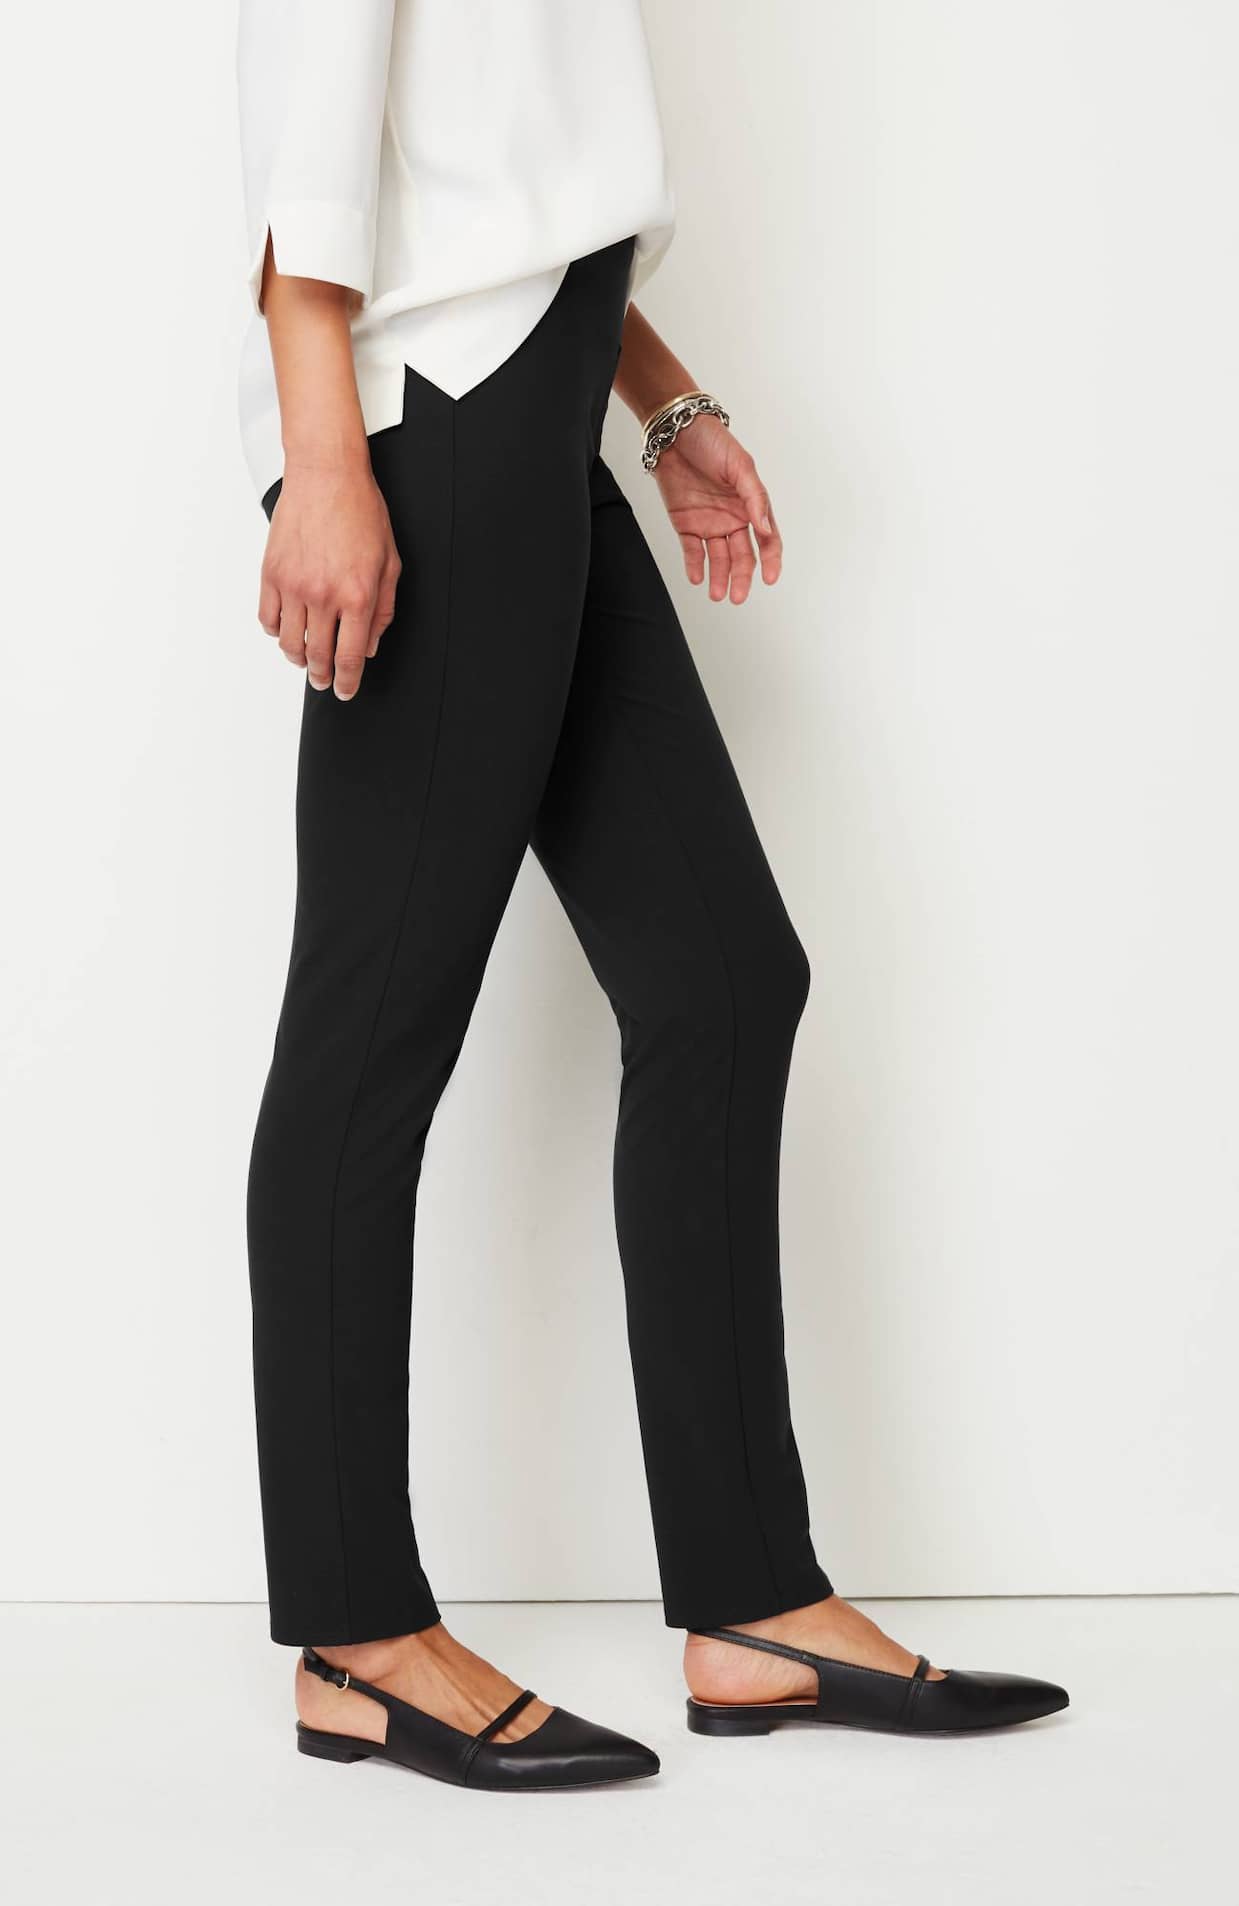 J.Jill Wearever Collection Smooth Fit Slim Leg Black Pants Size SP SMALL  PETITE - $19 - From Lori